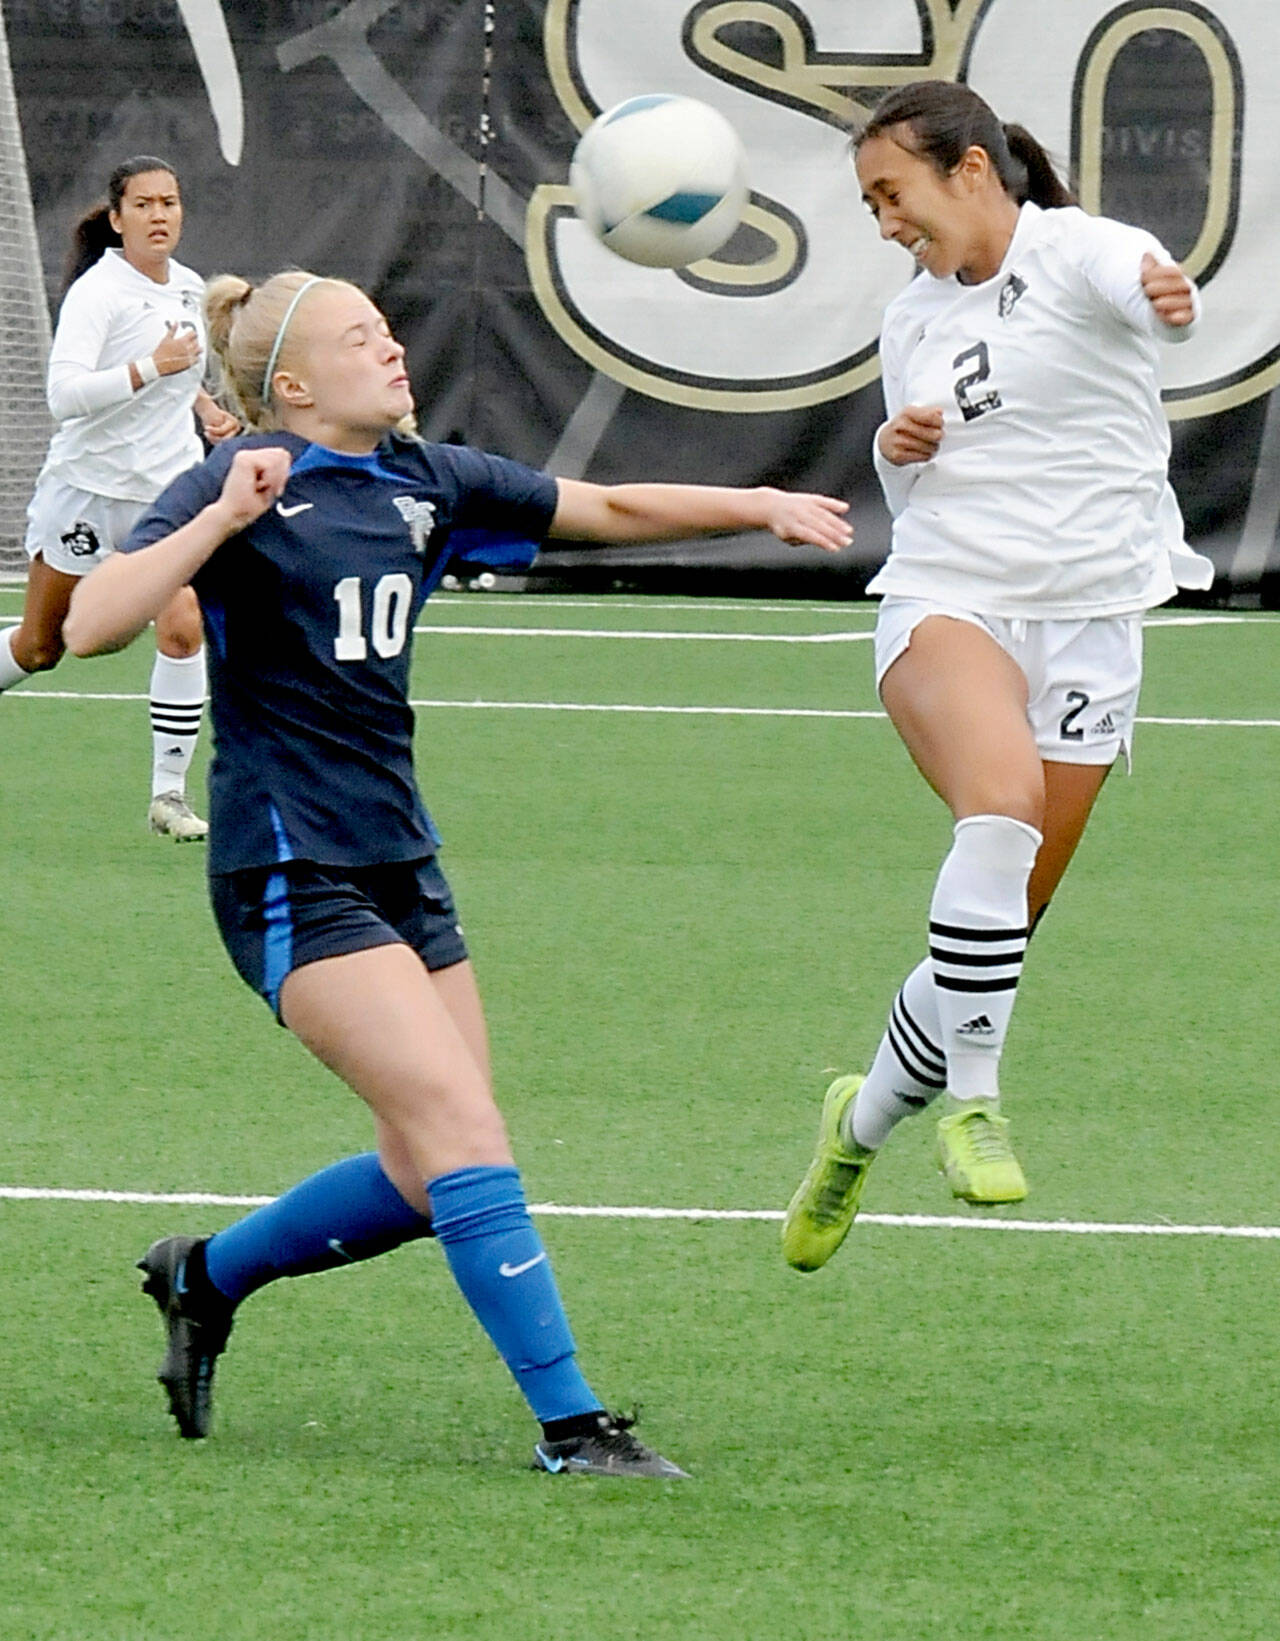 KEITH THORPE/PENINSULA DAILY NEWS Peninsula’s Briana-Jean Tanaka, right, leaps for a header in front of Bellevue’s Giulia Menning on Saturday at Peninsula College in Port Angeles. Looking on from behind is Tanaka’s teammate Keilee Silva.